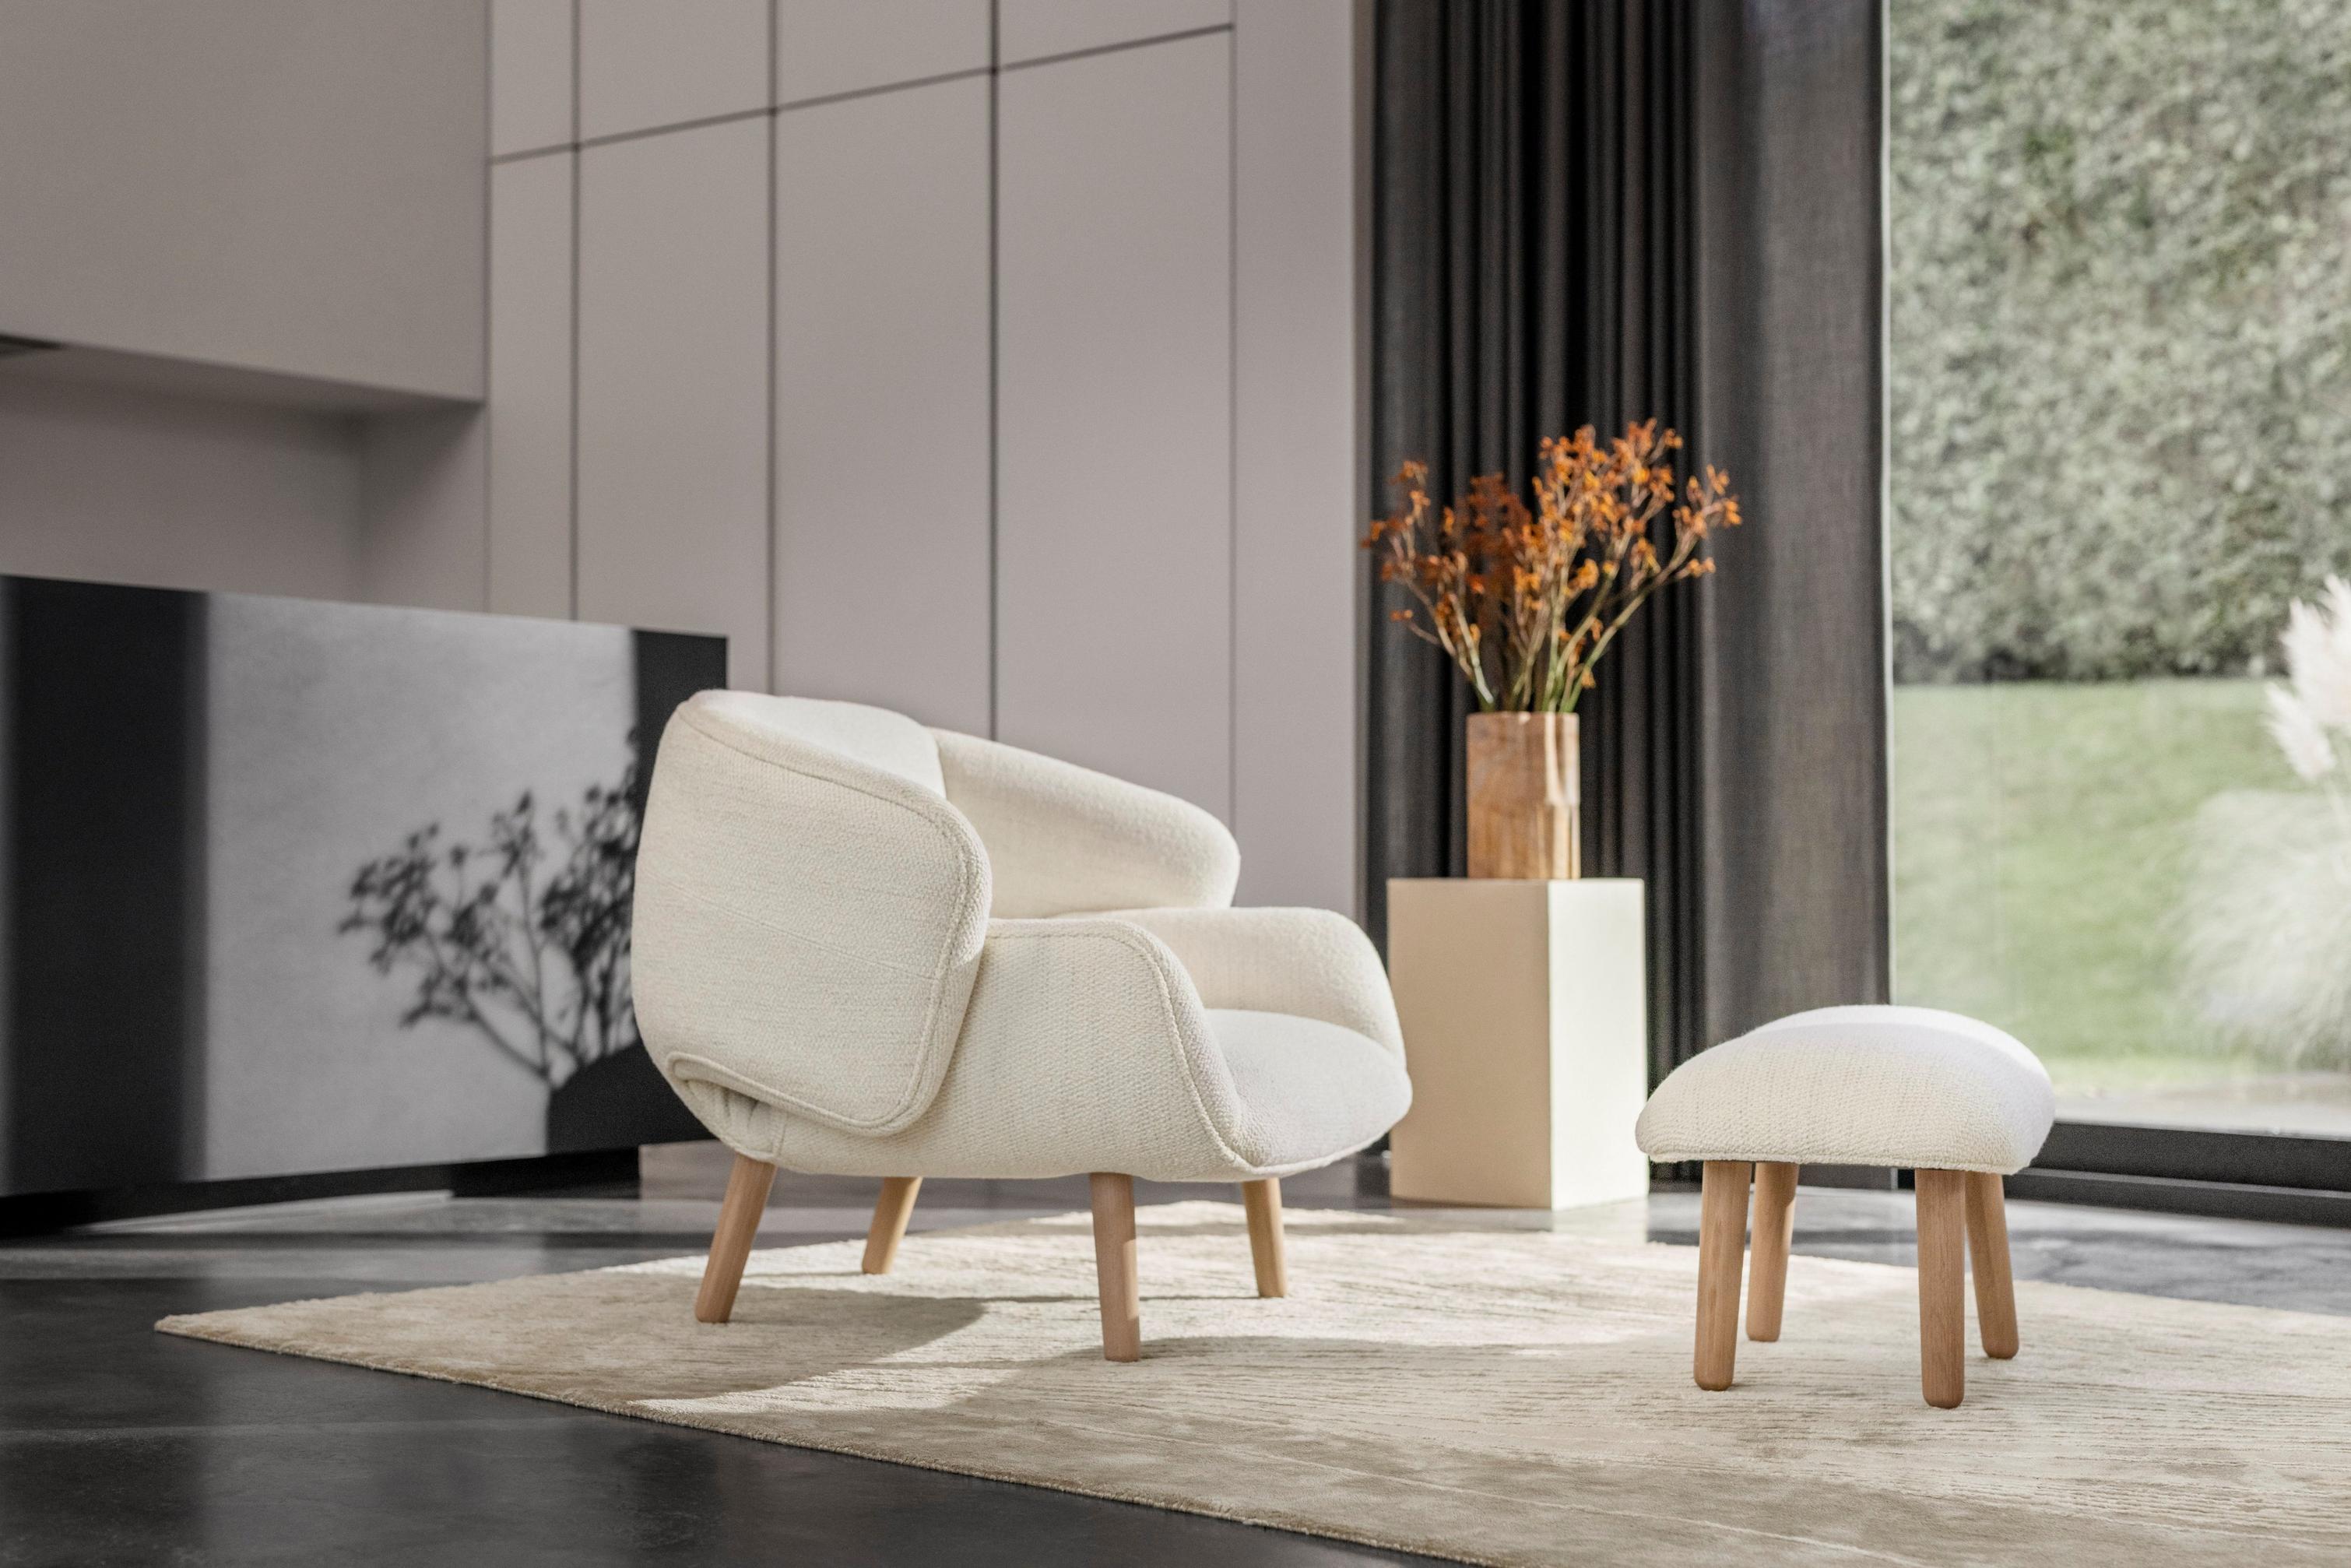 Bright living room featuring the Fusion chair in white Lazio fabric and matching foot stool.